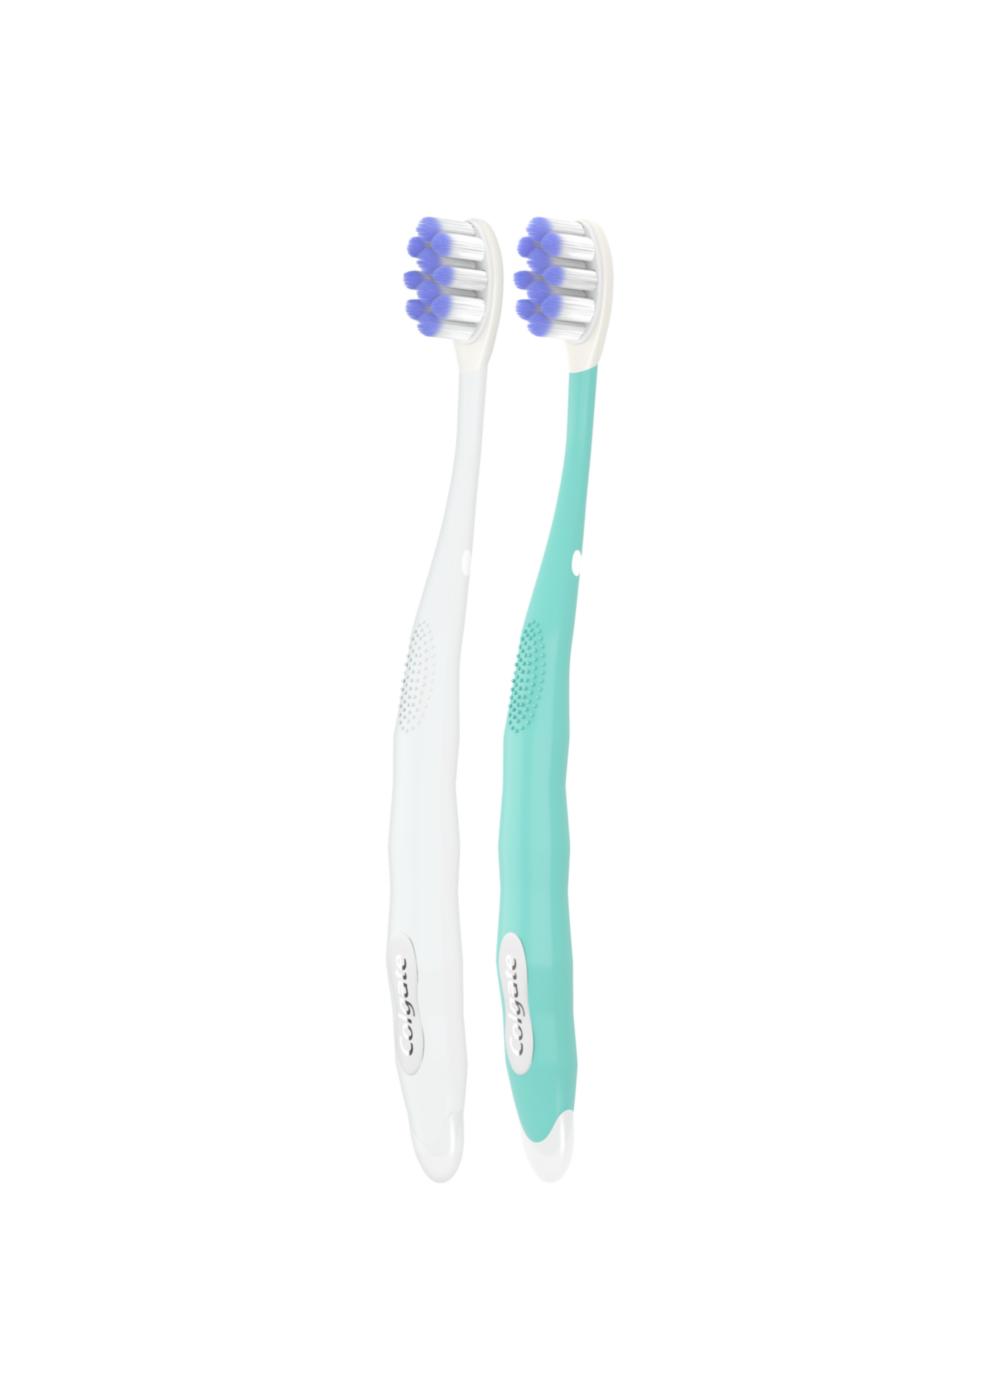 Colgate Sensitive Expert Toothbrushes - Ultra Soft; image 3 of 3